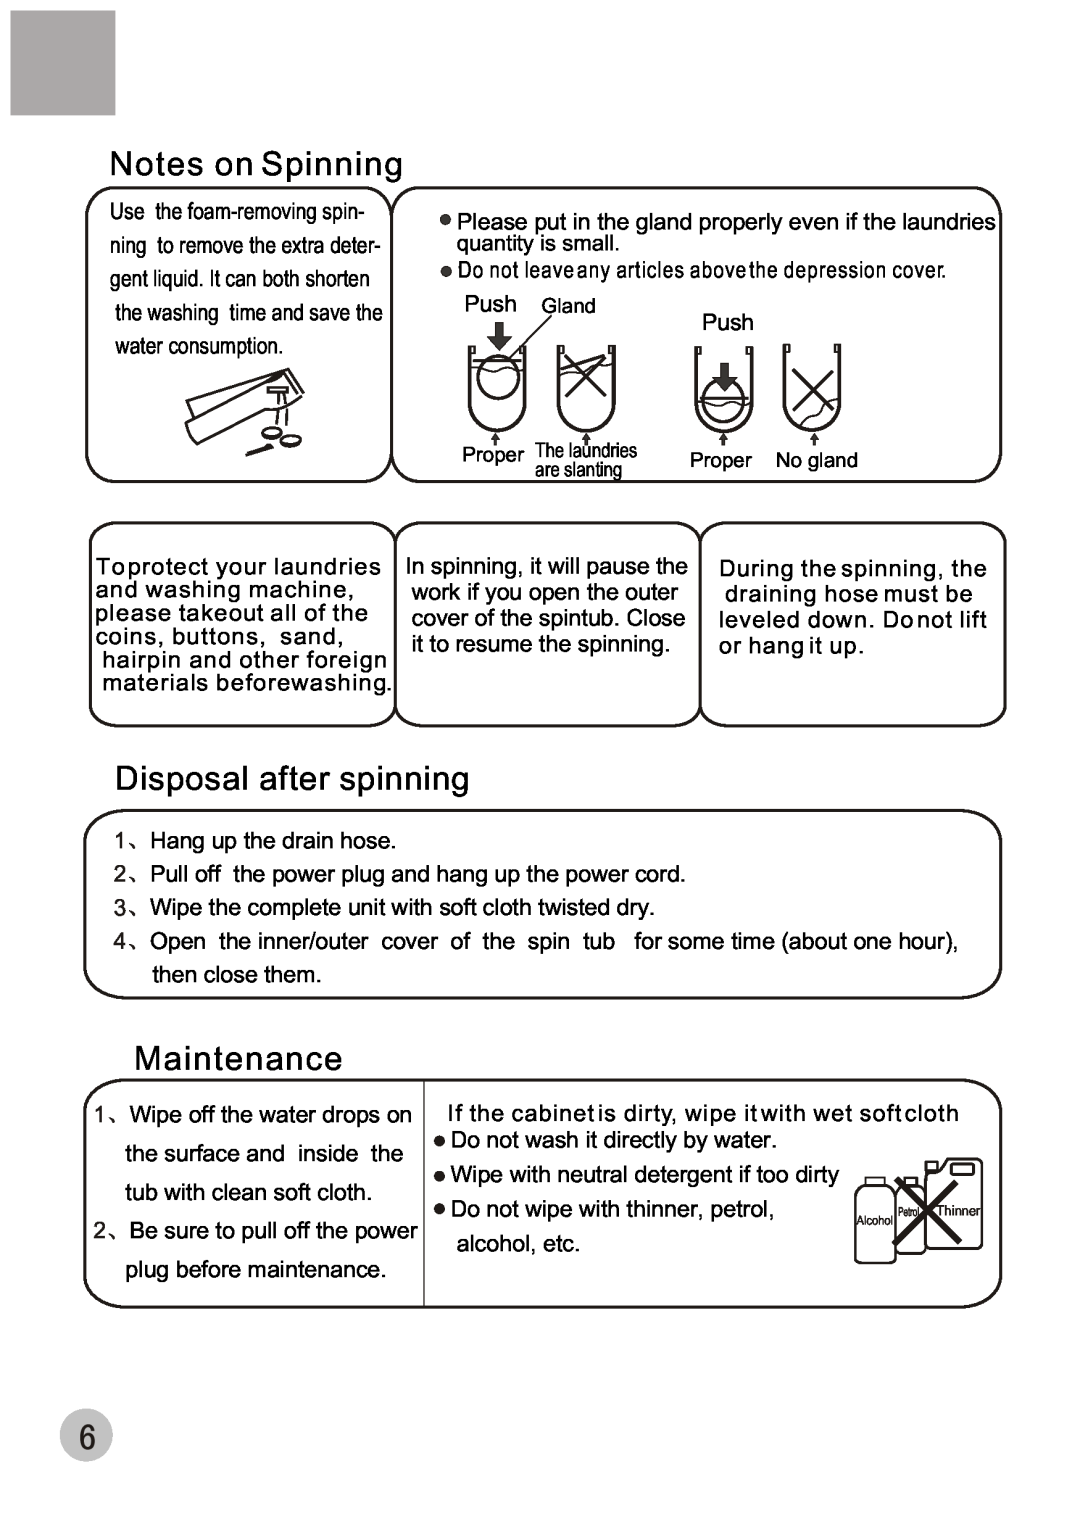 Haier T60-32 user manual Notes on Spinning, Disposal after spinning, Maintenance, Do not wipe with thinner, petrol 